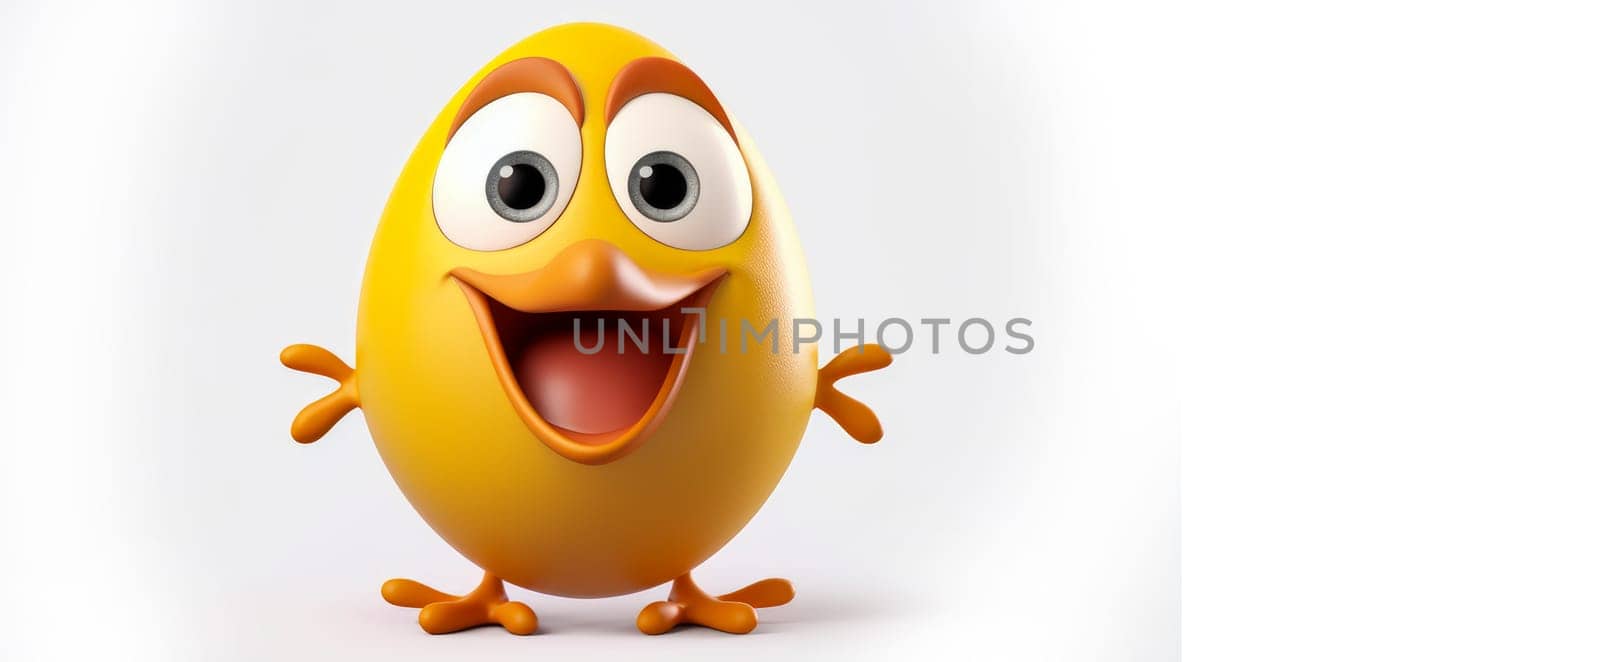 Chicken egg with a cheerful face 3D on a white background. Cartoon characters, three-dimensional character, healthy lifestyle, proper nutrition, diet, fresh vegetables and fruits, vegetarianism, veganism, food, breakfast, fun, laughter, banner